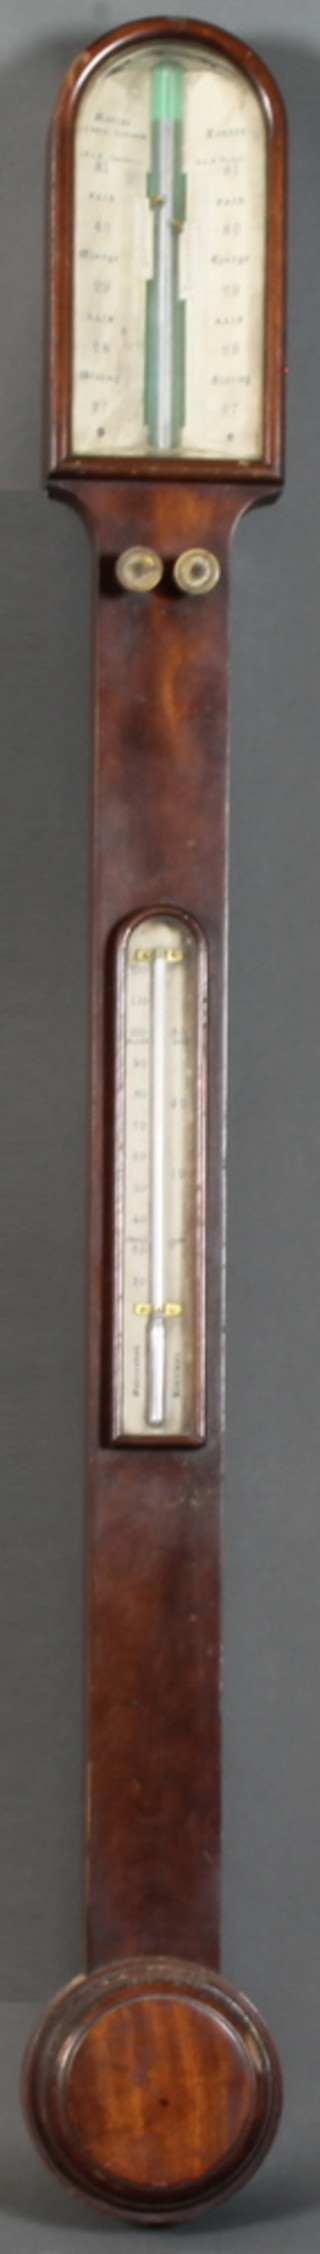 Macrae, 29 Royal Exchange London, an early Victorian mahogany stick barometer, having ivory vernier scale with  Arabic calibrations above a thermometer, with cistern below 36"h  x 4"w  ILLUSTRATED